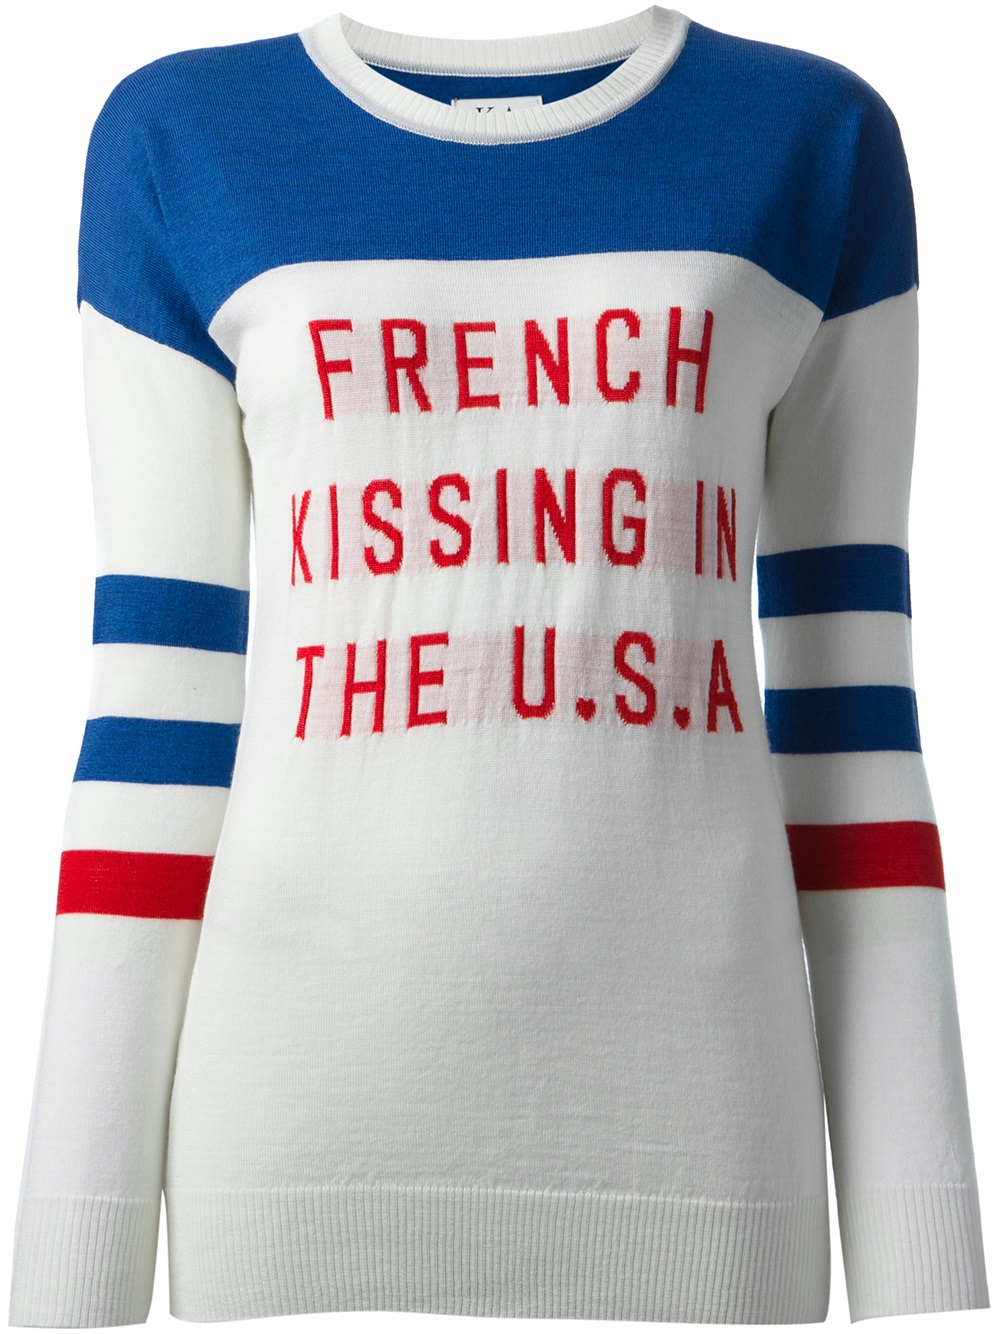 Allemaal Geologie Tonen Zoe Karssen French Kissing in The Usa Sweater in White | Lyst